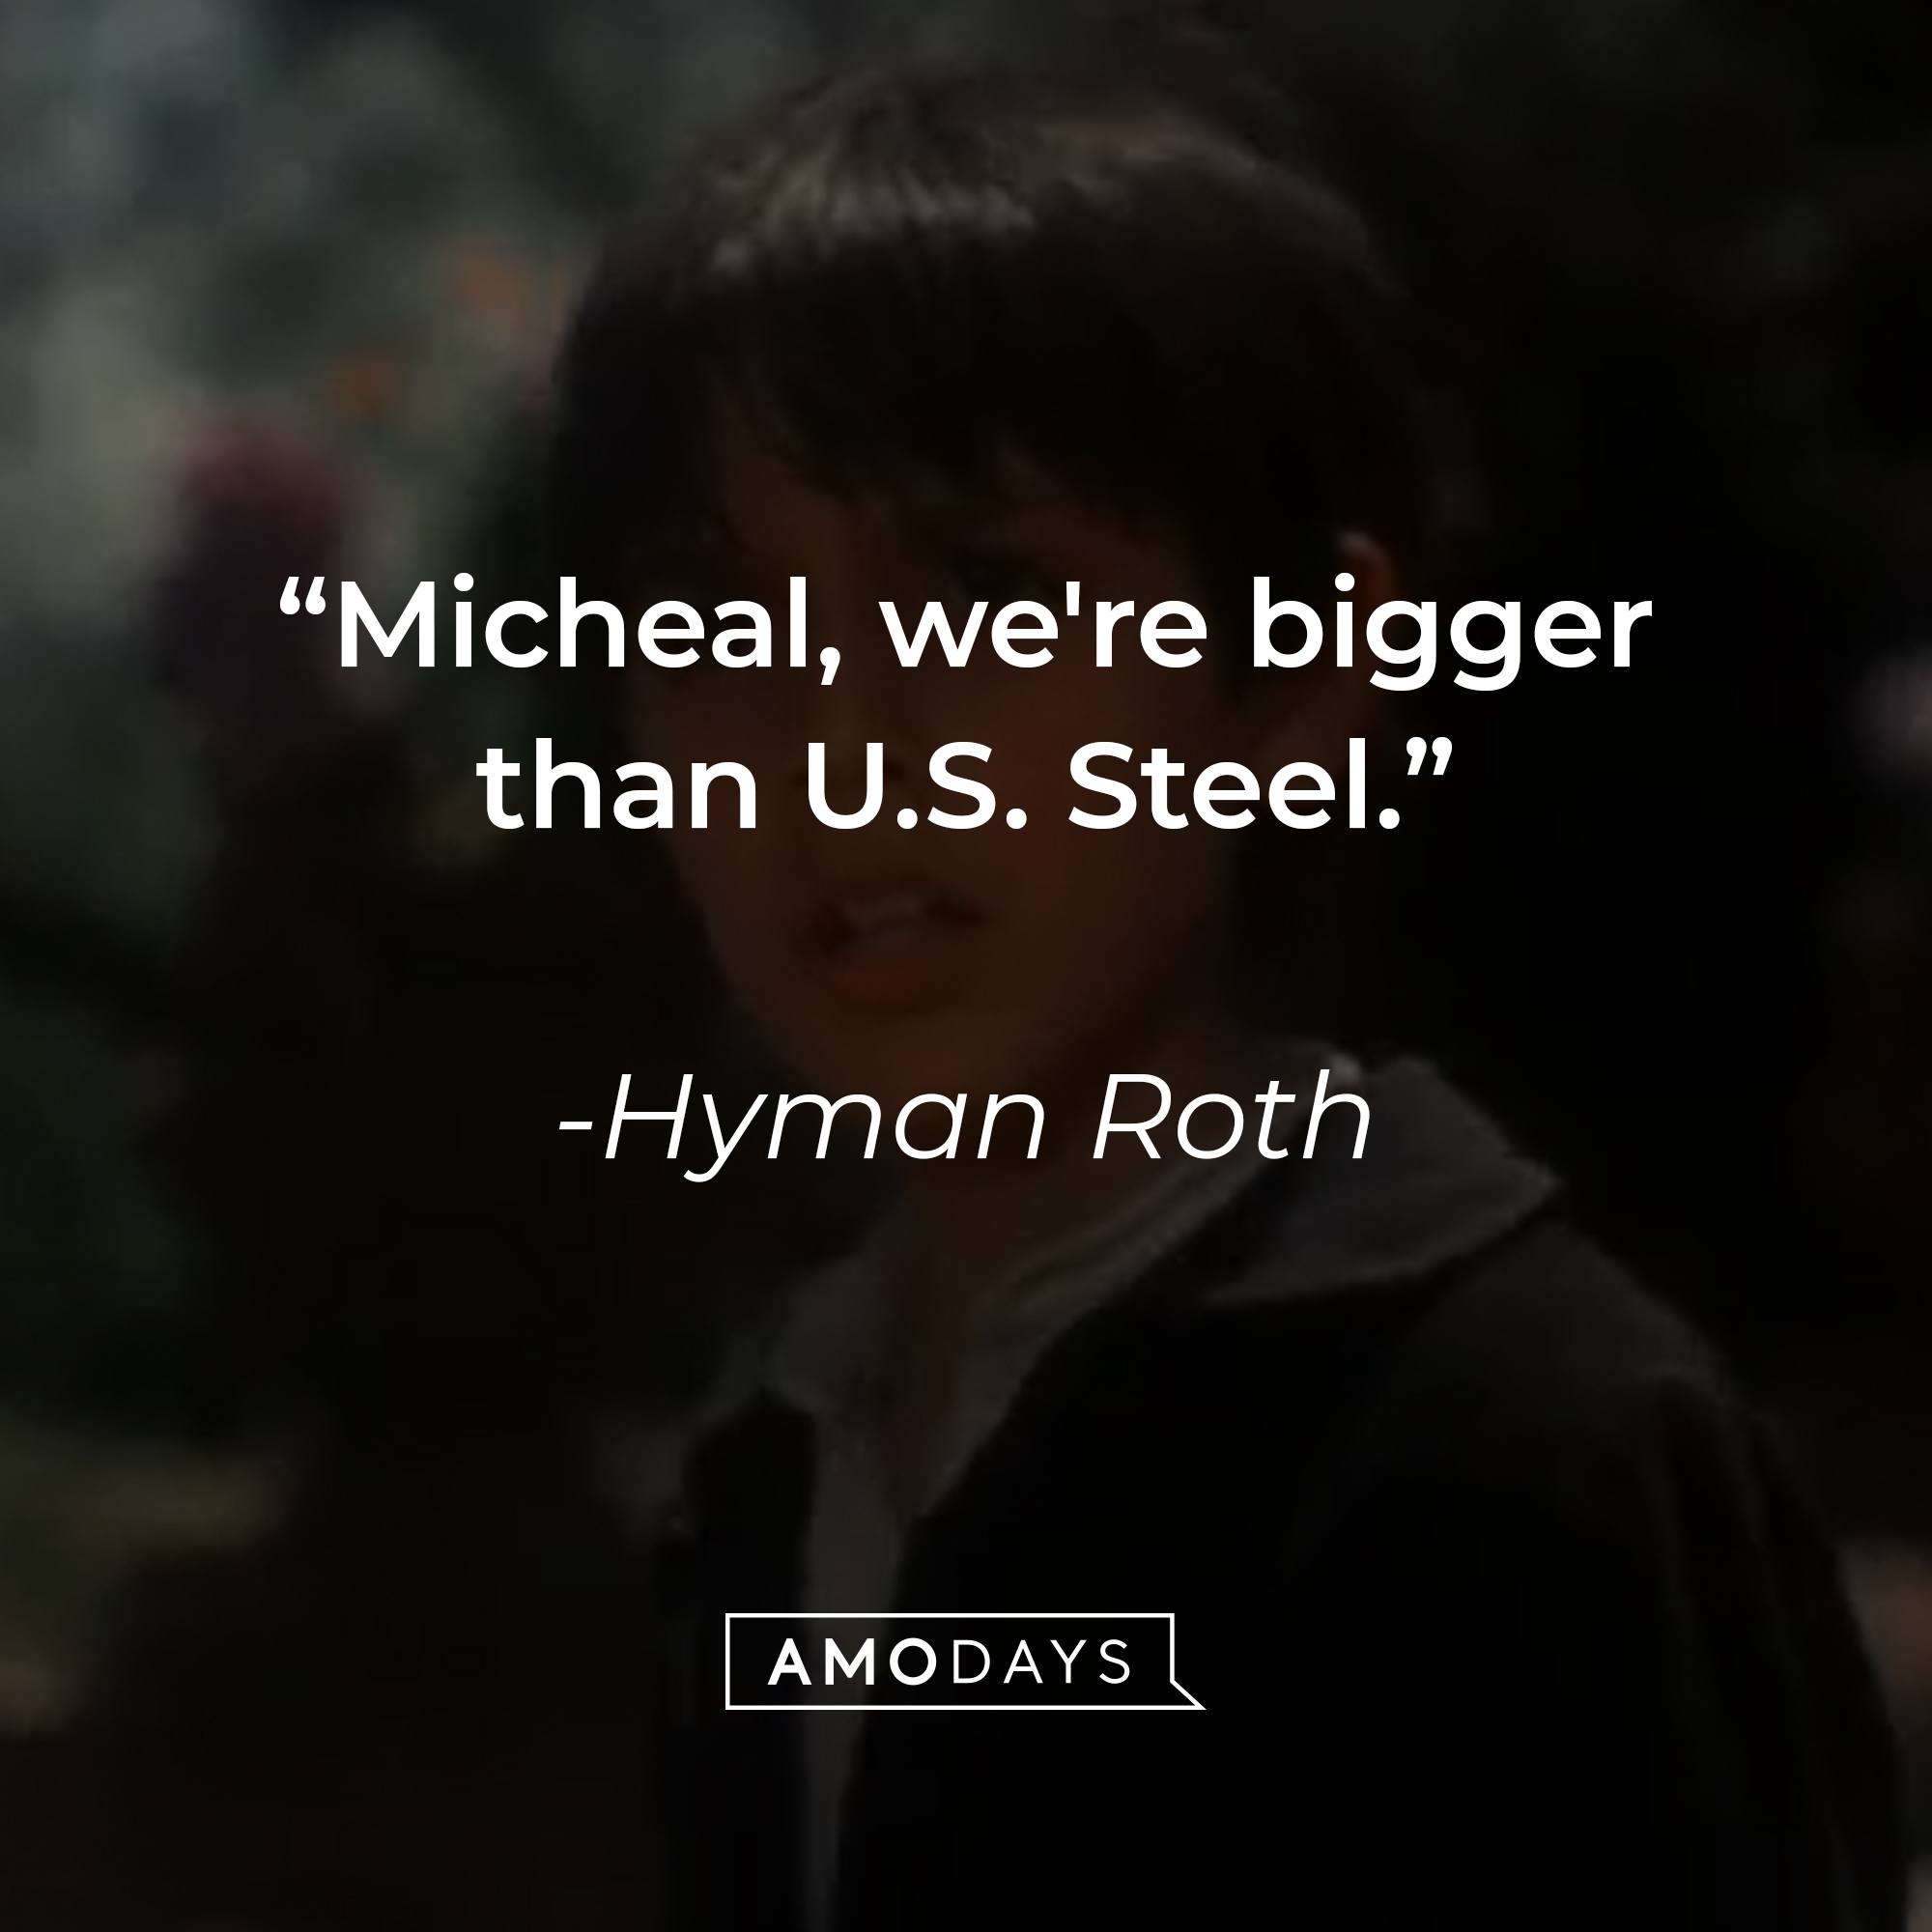 A photo from "The Godfather Part II" with the quote, "Micheal, we're bigger than U.S. Steel." | Source: YouTube.paramountmovies